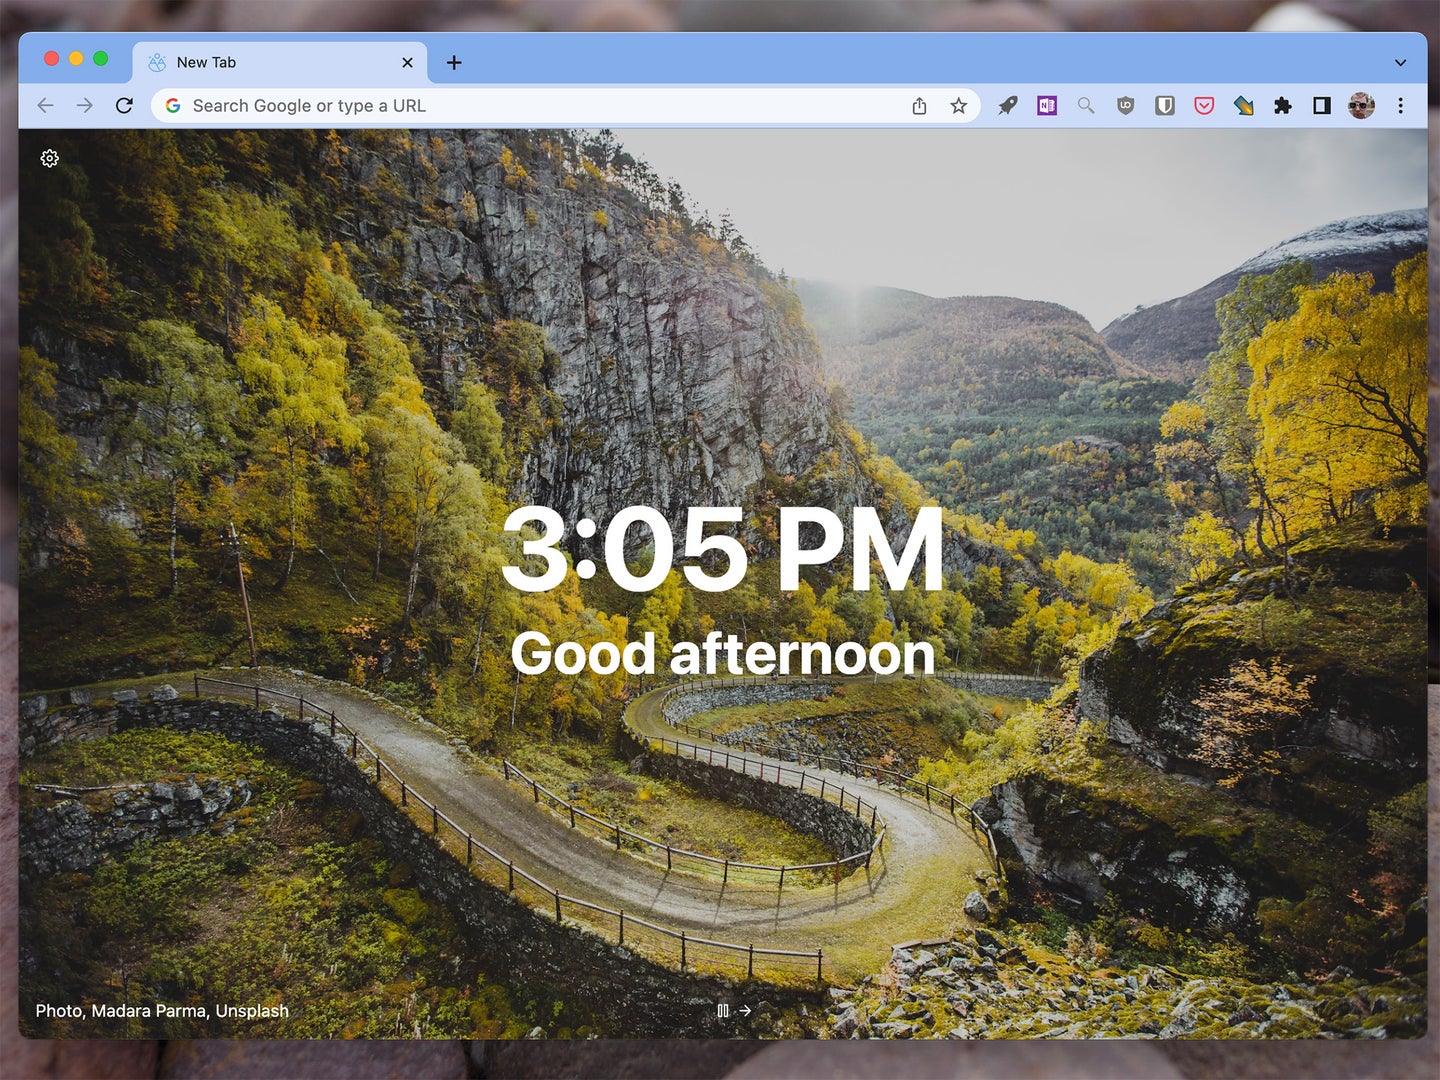 A customized Google Chrome new tab page that uses Tabliss to change the display from the default into a lush mountainous landscape with a road, and the time of day.